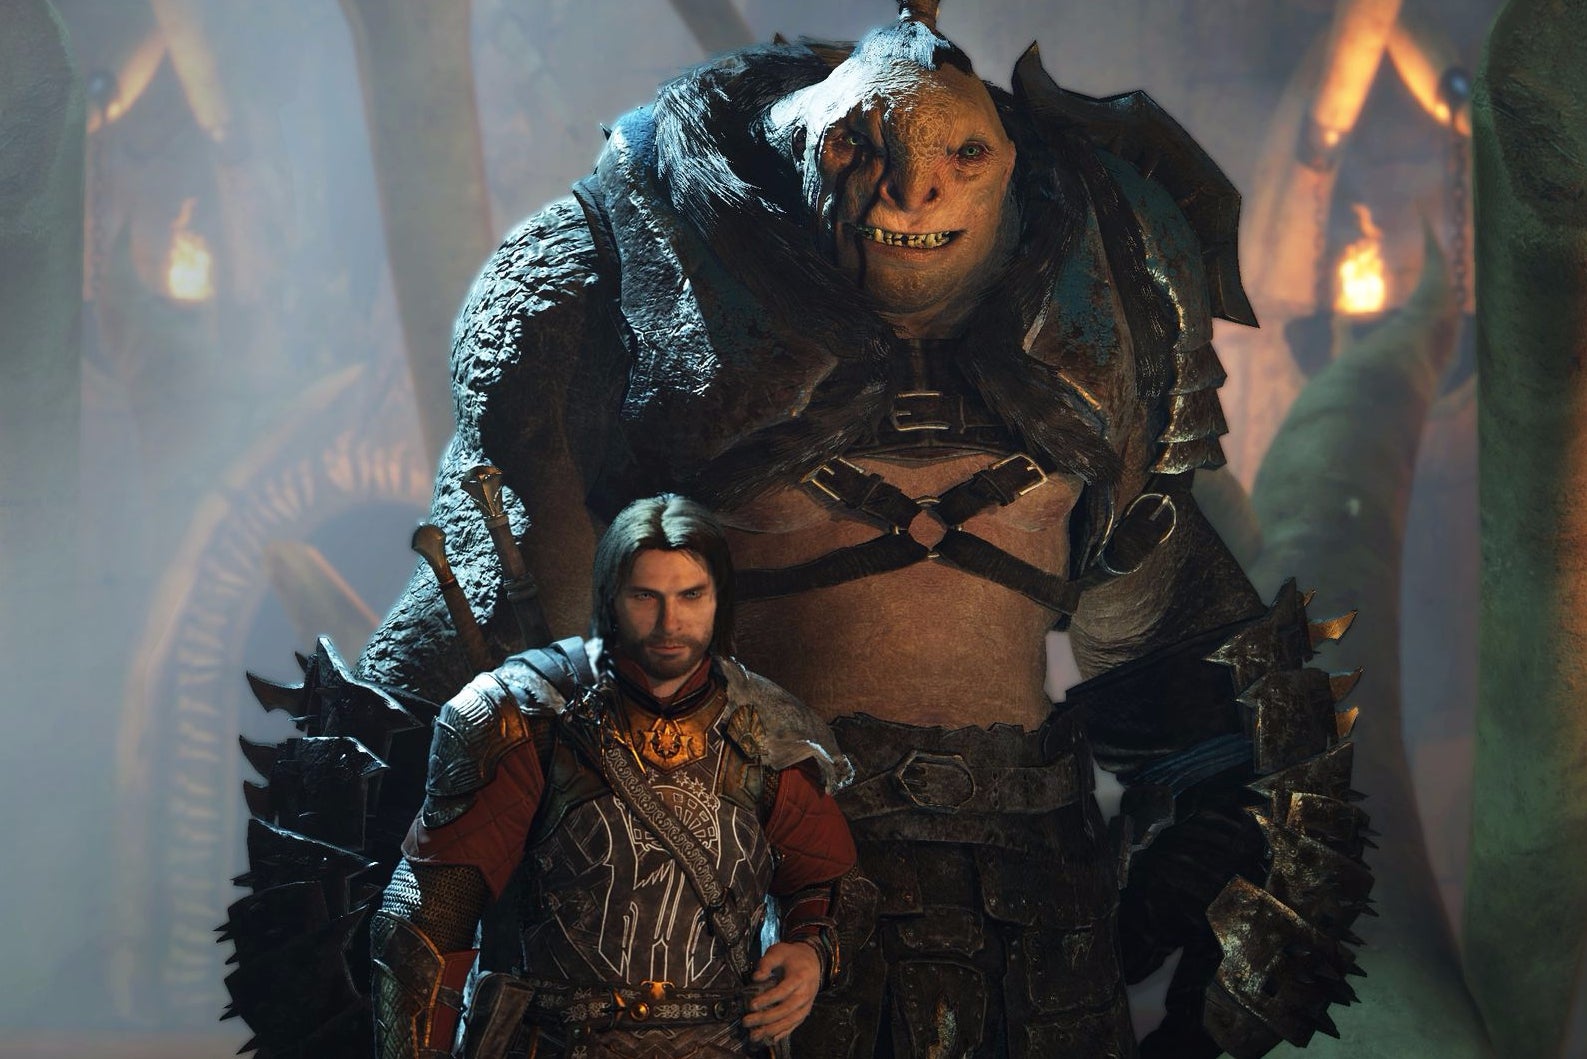 Image for Shadow of War XP farming - How to earn 50k experience per hour from Nemesis Missions